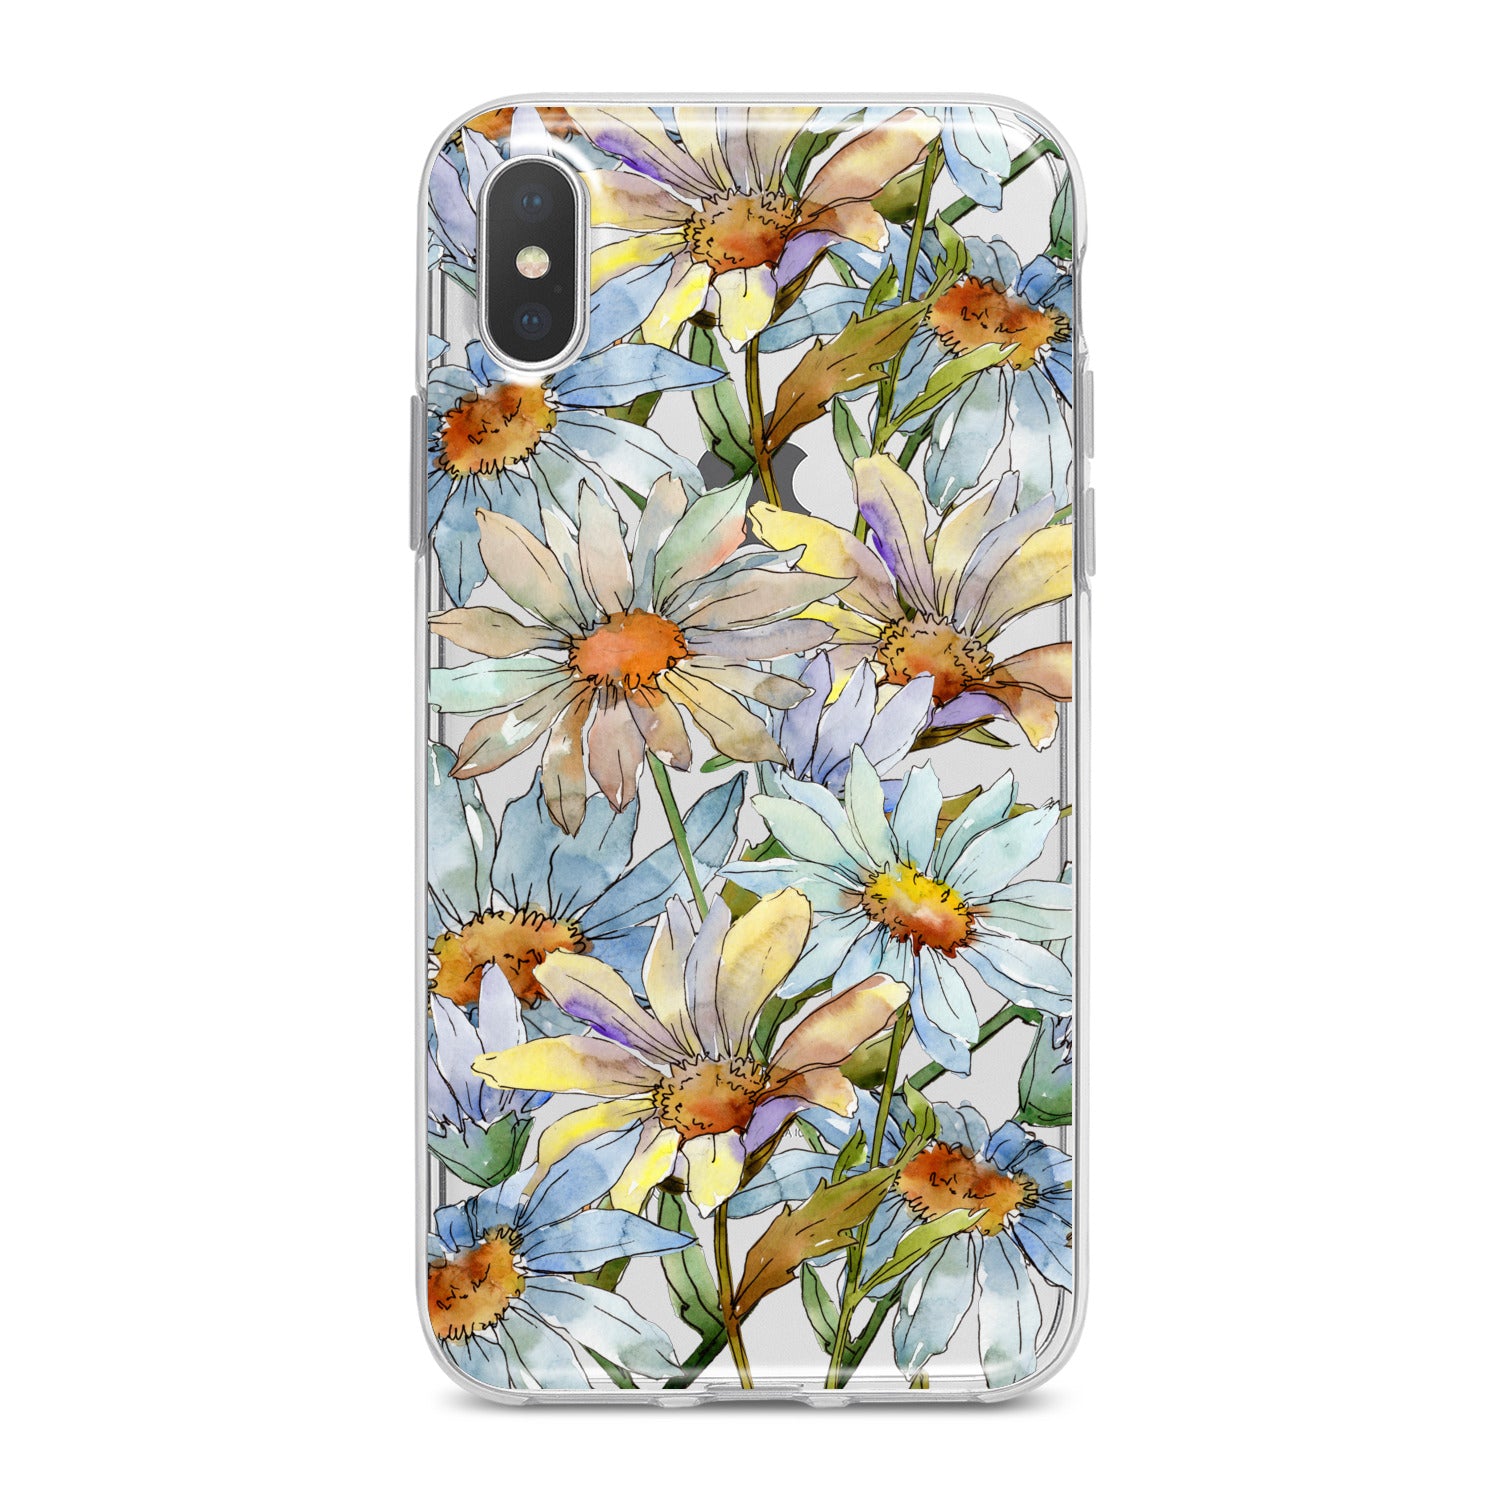 Lex Altern Watercolor Daisies Phone Case for your iPhone & Android phone.